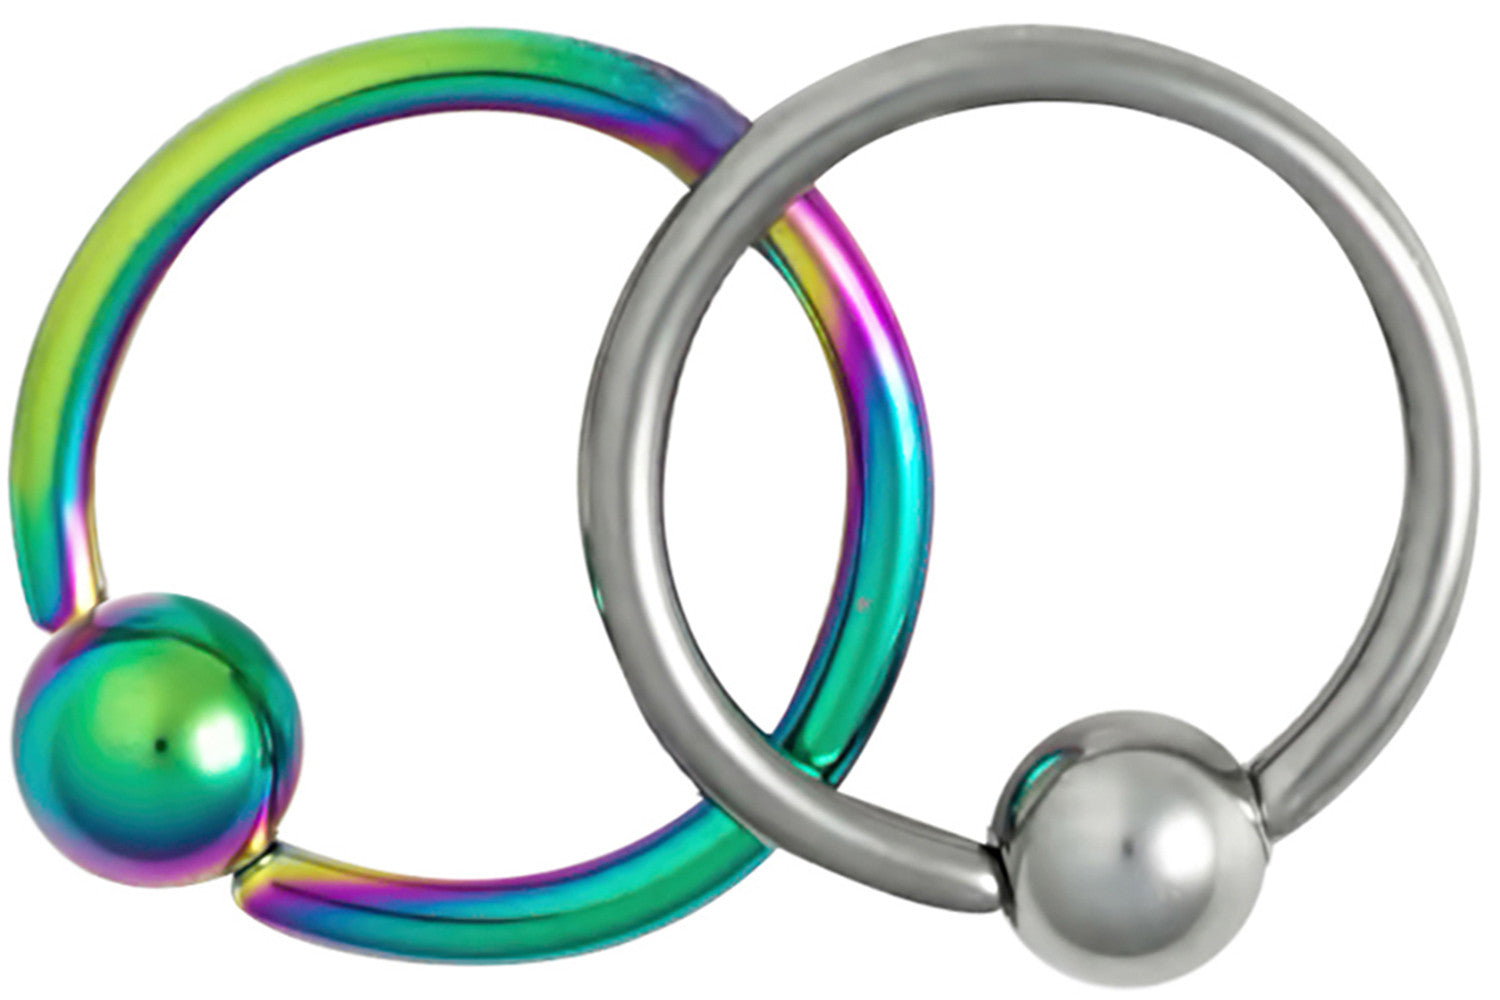 This set of 18 gauge cartilage jewelry includes a plain steel hoop and a Titanium IP plated rainbow hoop. IP (Ion Plating) is a safe and permanent fusion coating process used to enhance the durability, color and shine of body jewelry. Both pieces of jewelry are made with surgical grade 316L Stainless Steel. These captive bead rings have a 5/16" (8 mm) diameter and come with a 3 mm ball. Both pieces of body piercing jewelry are hypoallergenic and nickel free.